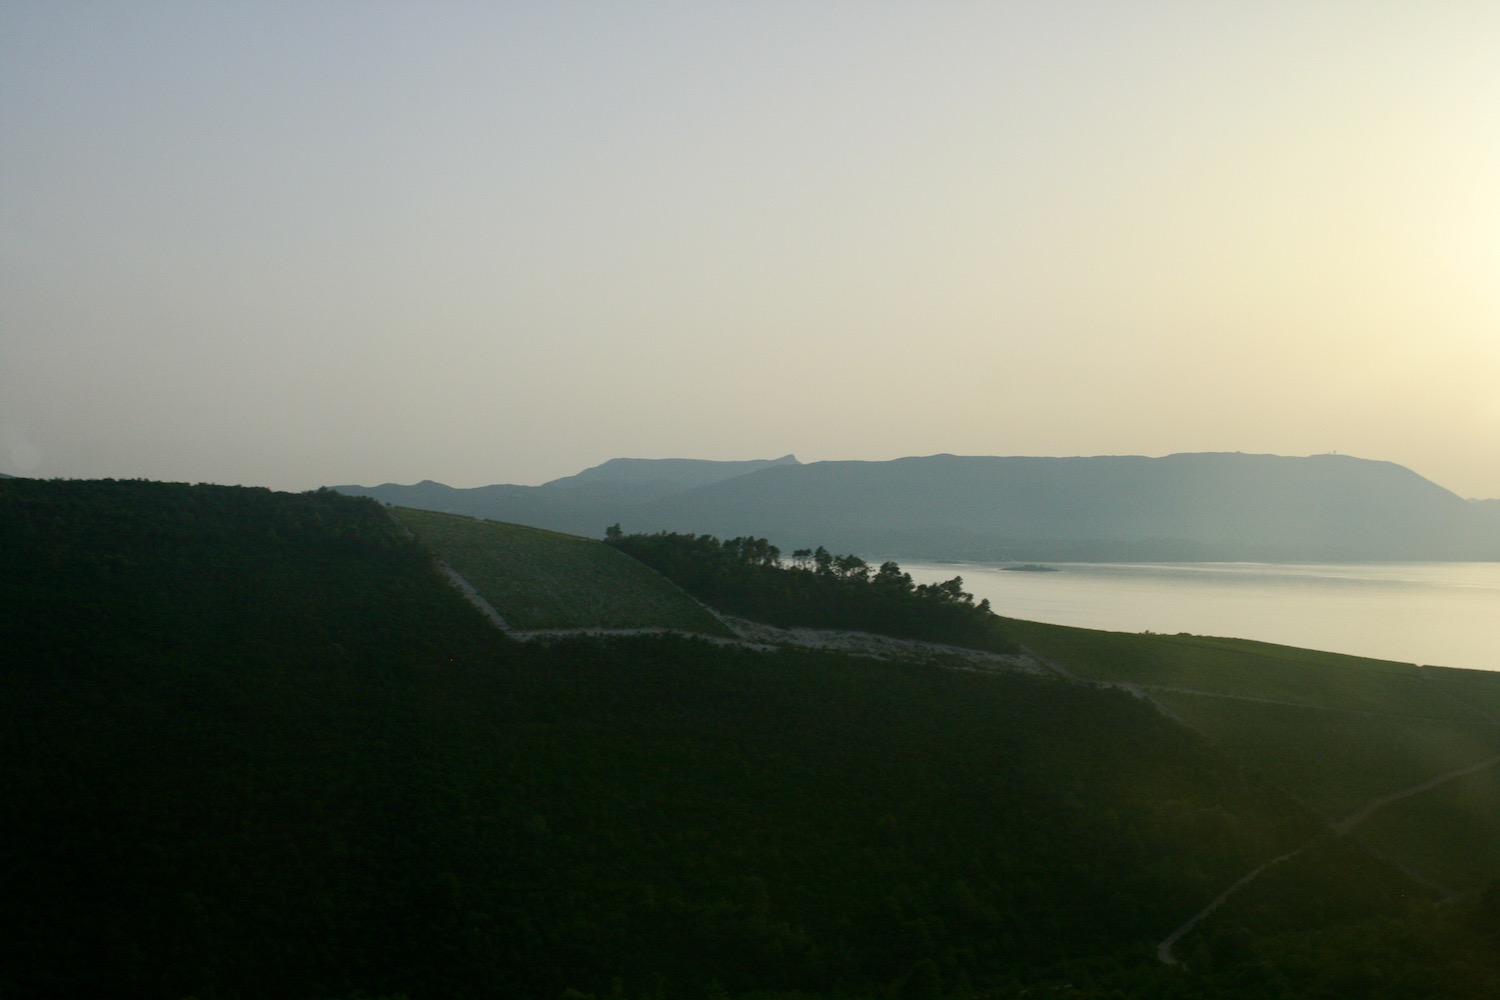 a landscape with a body of water and hills